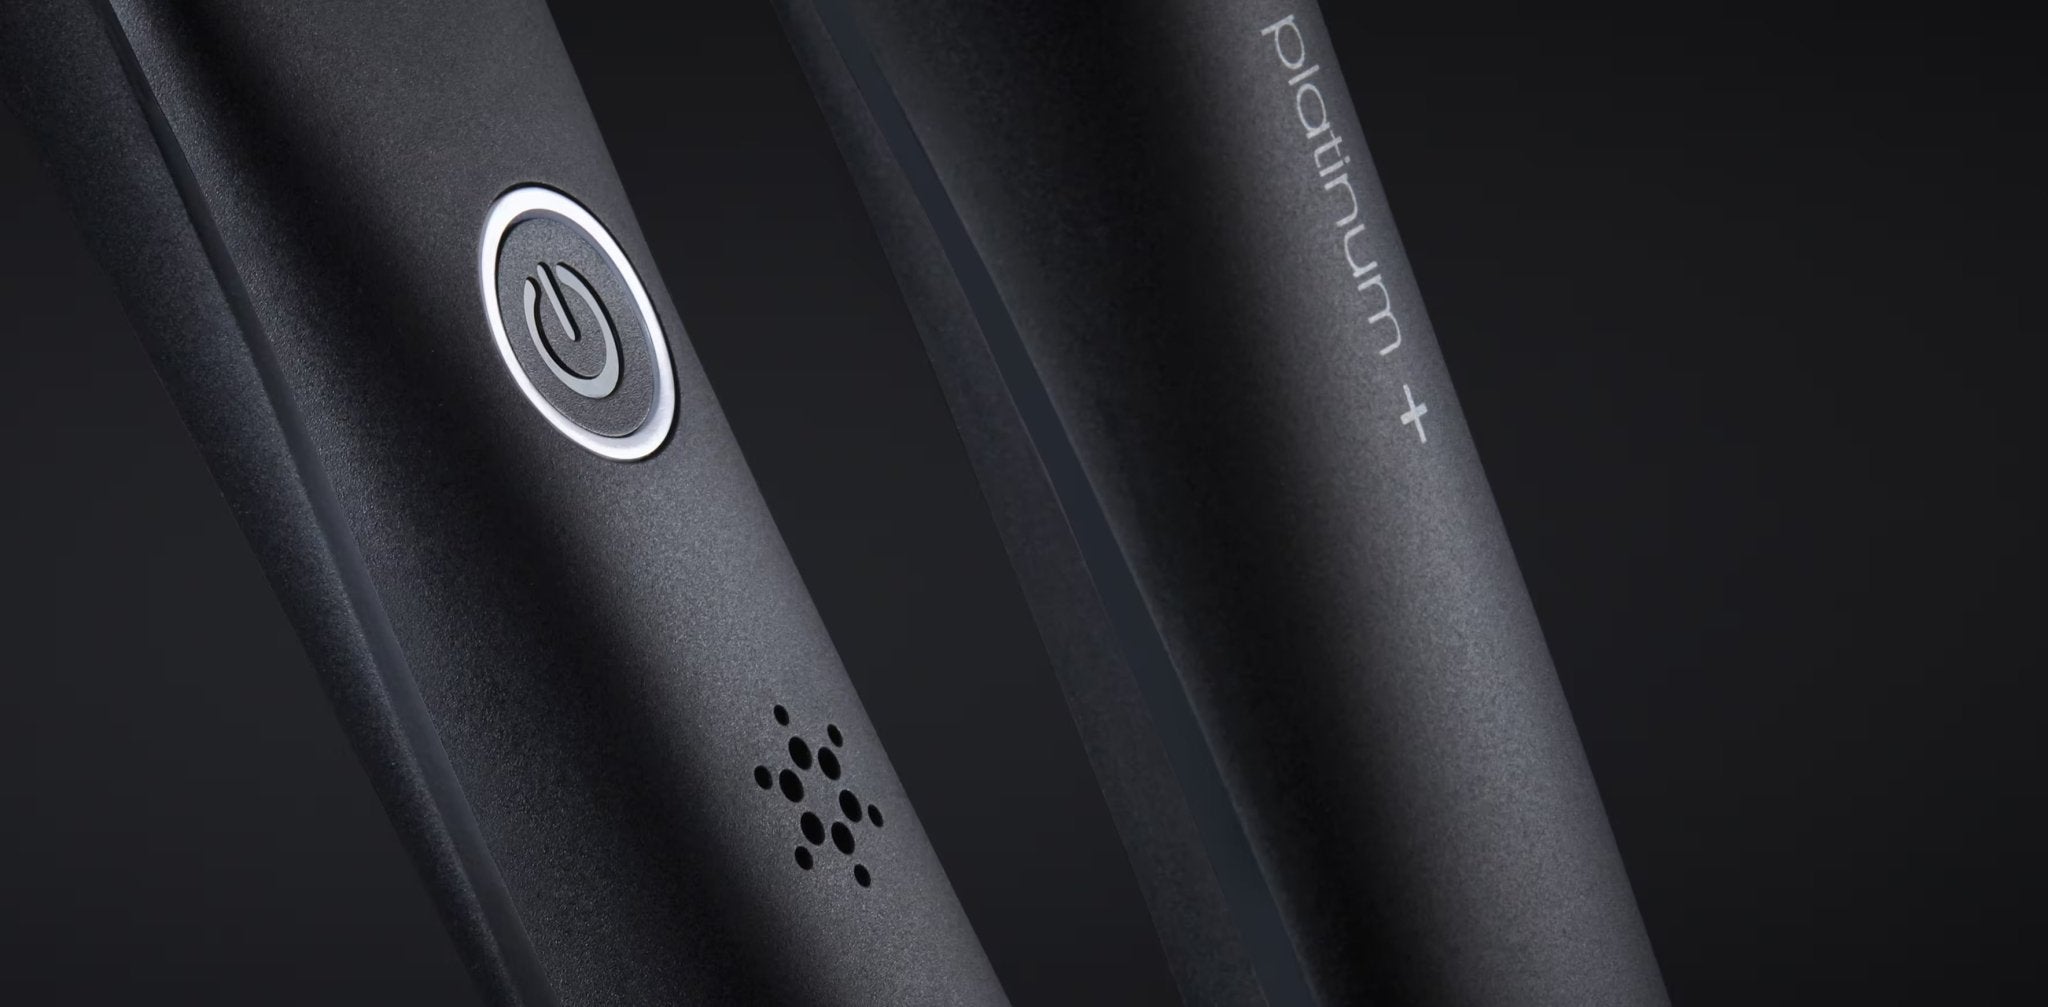 Close-up of a black GHD PLATINUM+ STYLER - 1" FLAT IRON with a power button and “platinum+” text visible on the device, highlighting its smart styler capabilities for personalized styling.